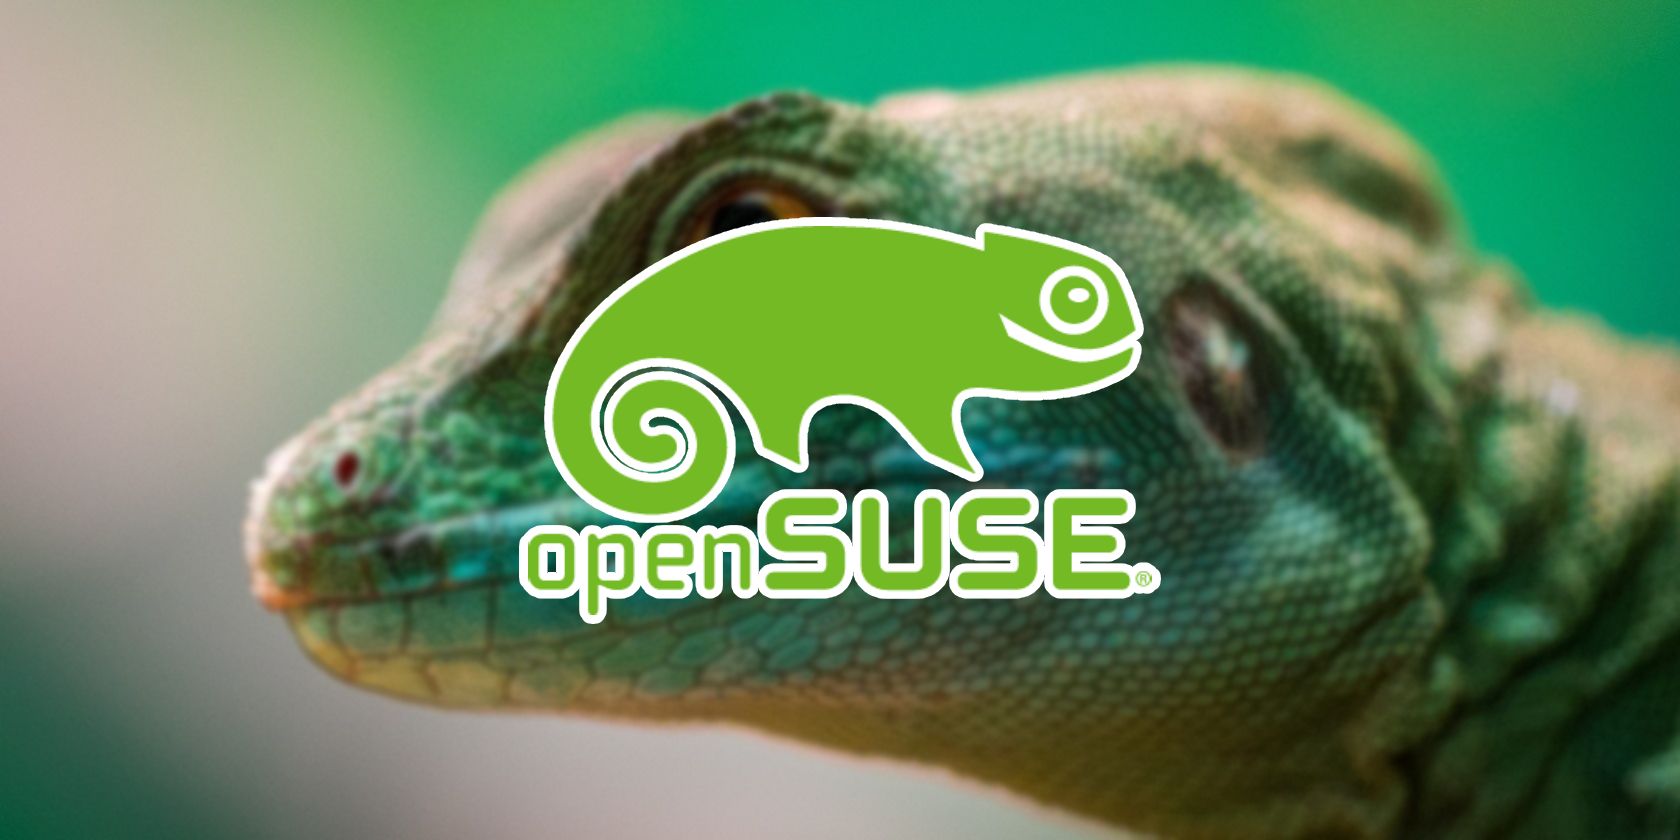 opensuse logo on a background